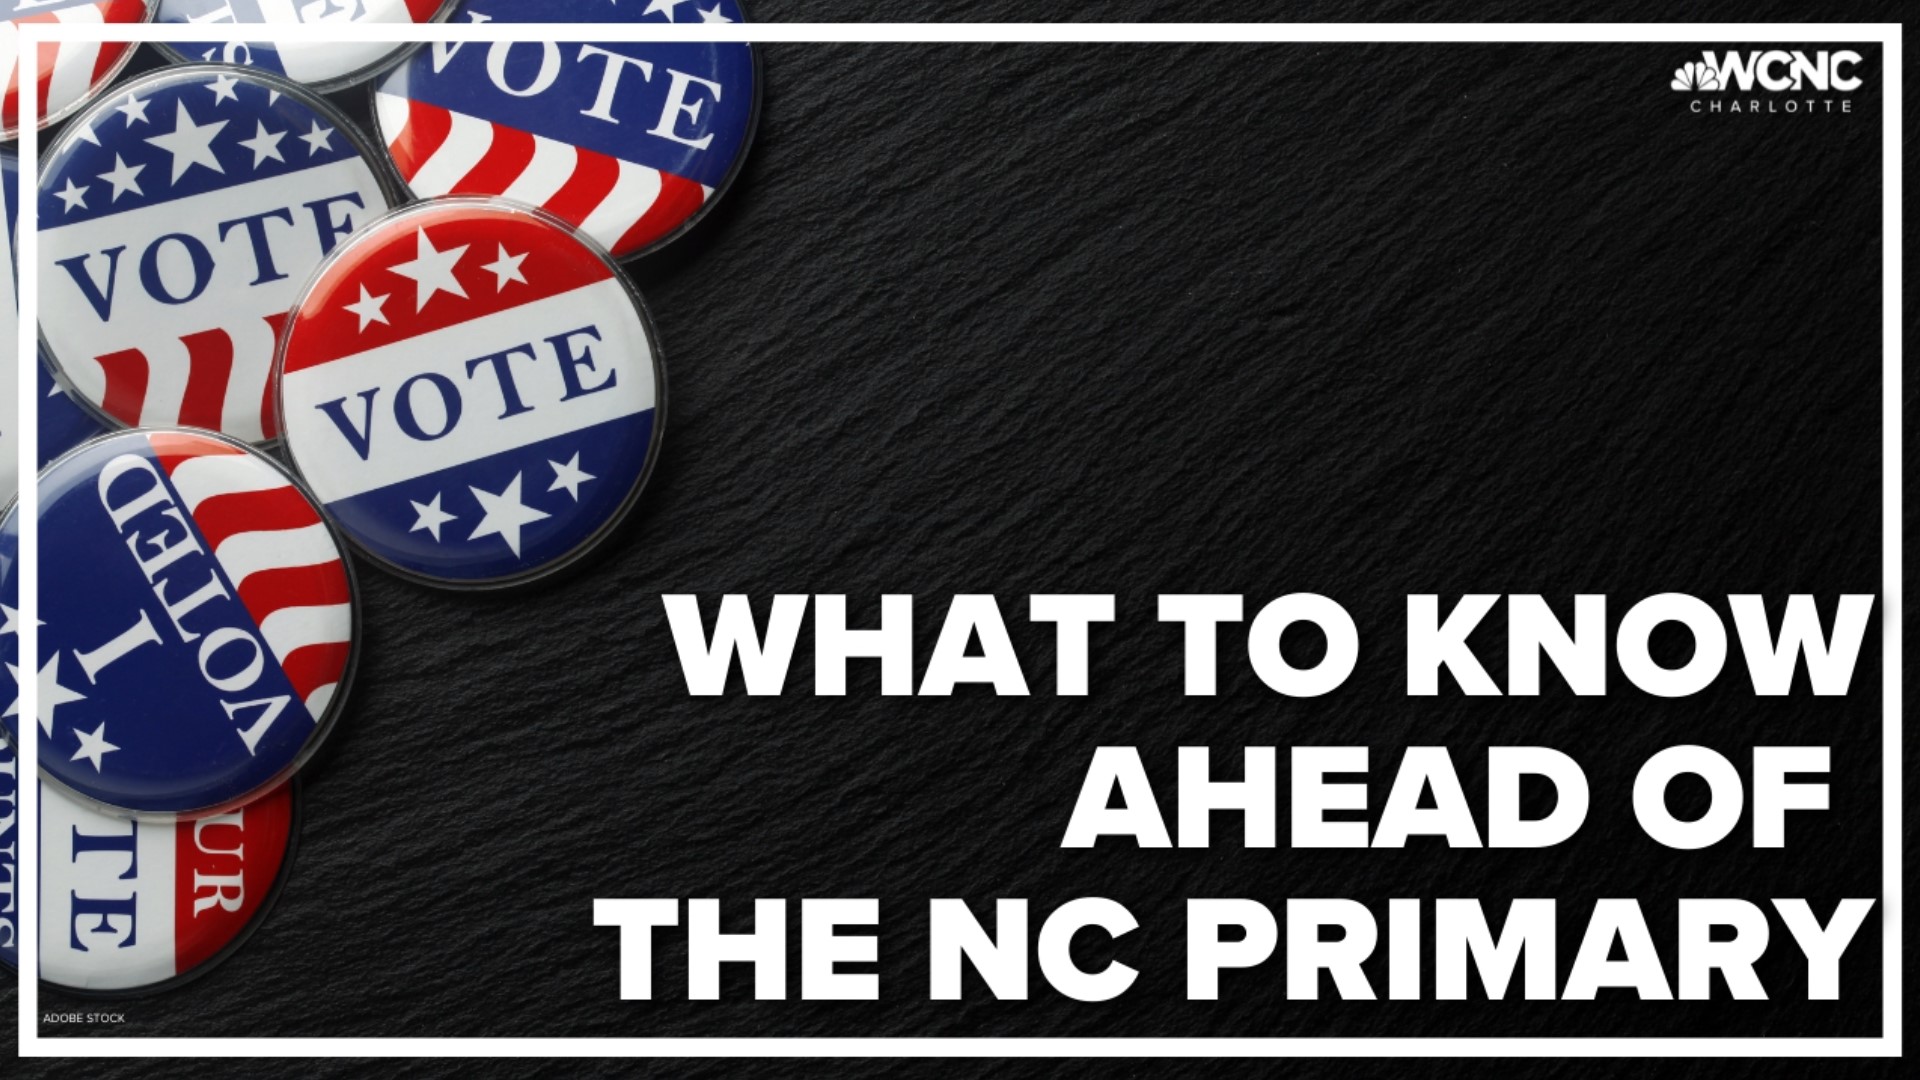 Tuesday, May 17 is Election Day for North Carolina's primary election, with many key races being on the ballot in the Charlotte area.